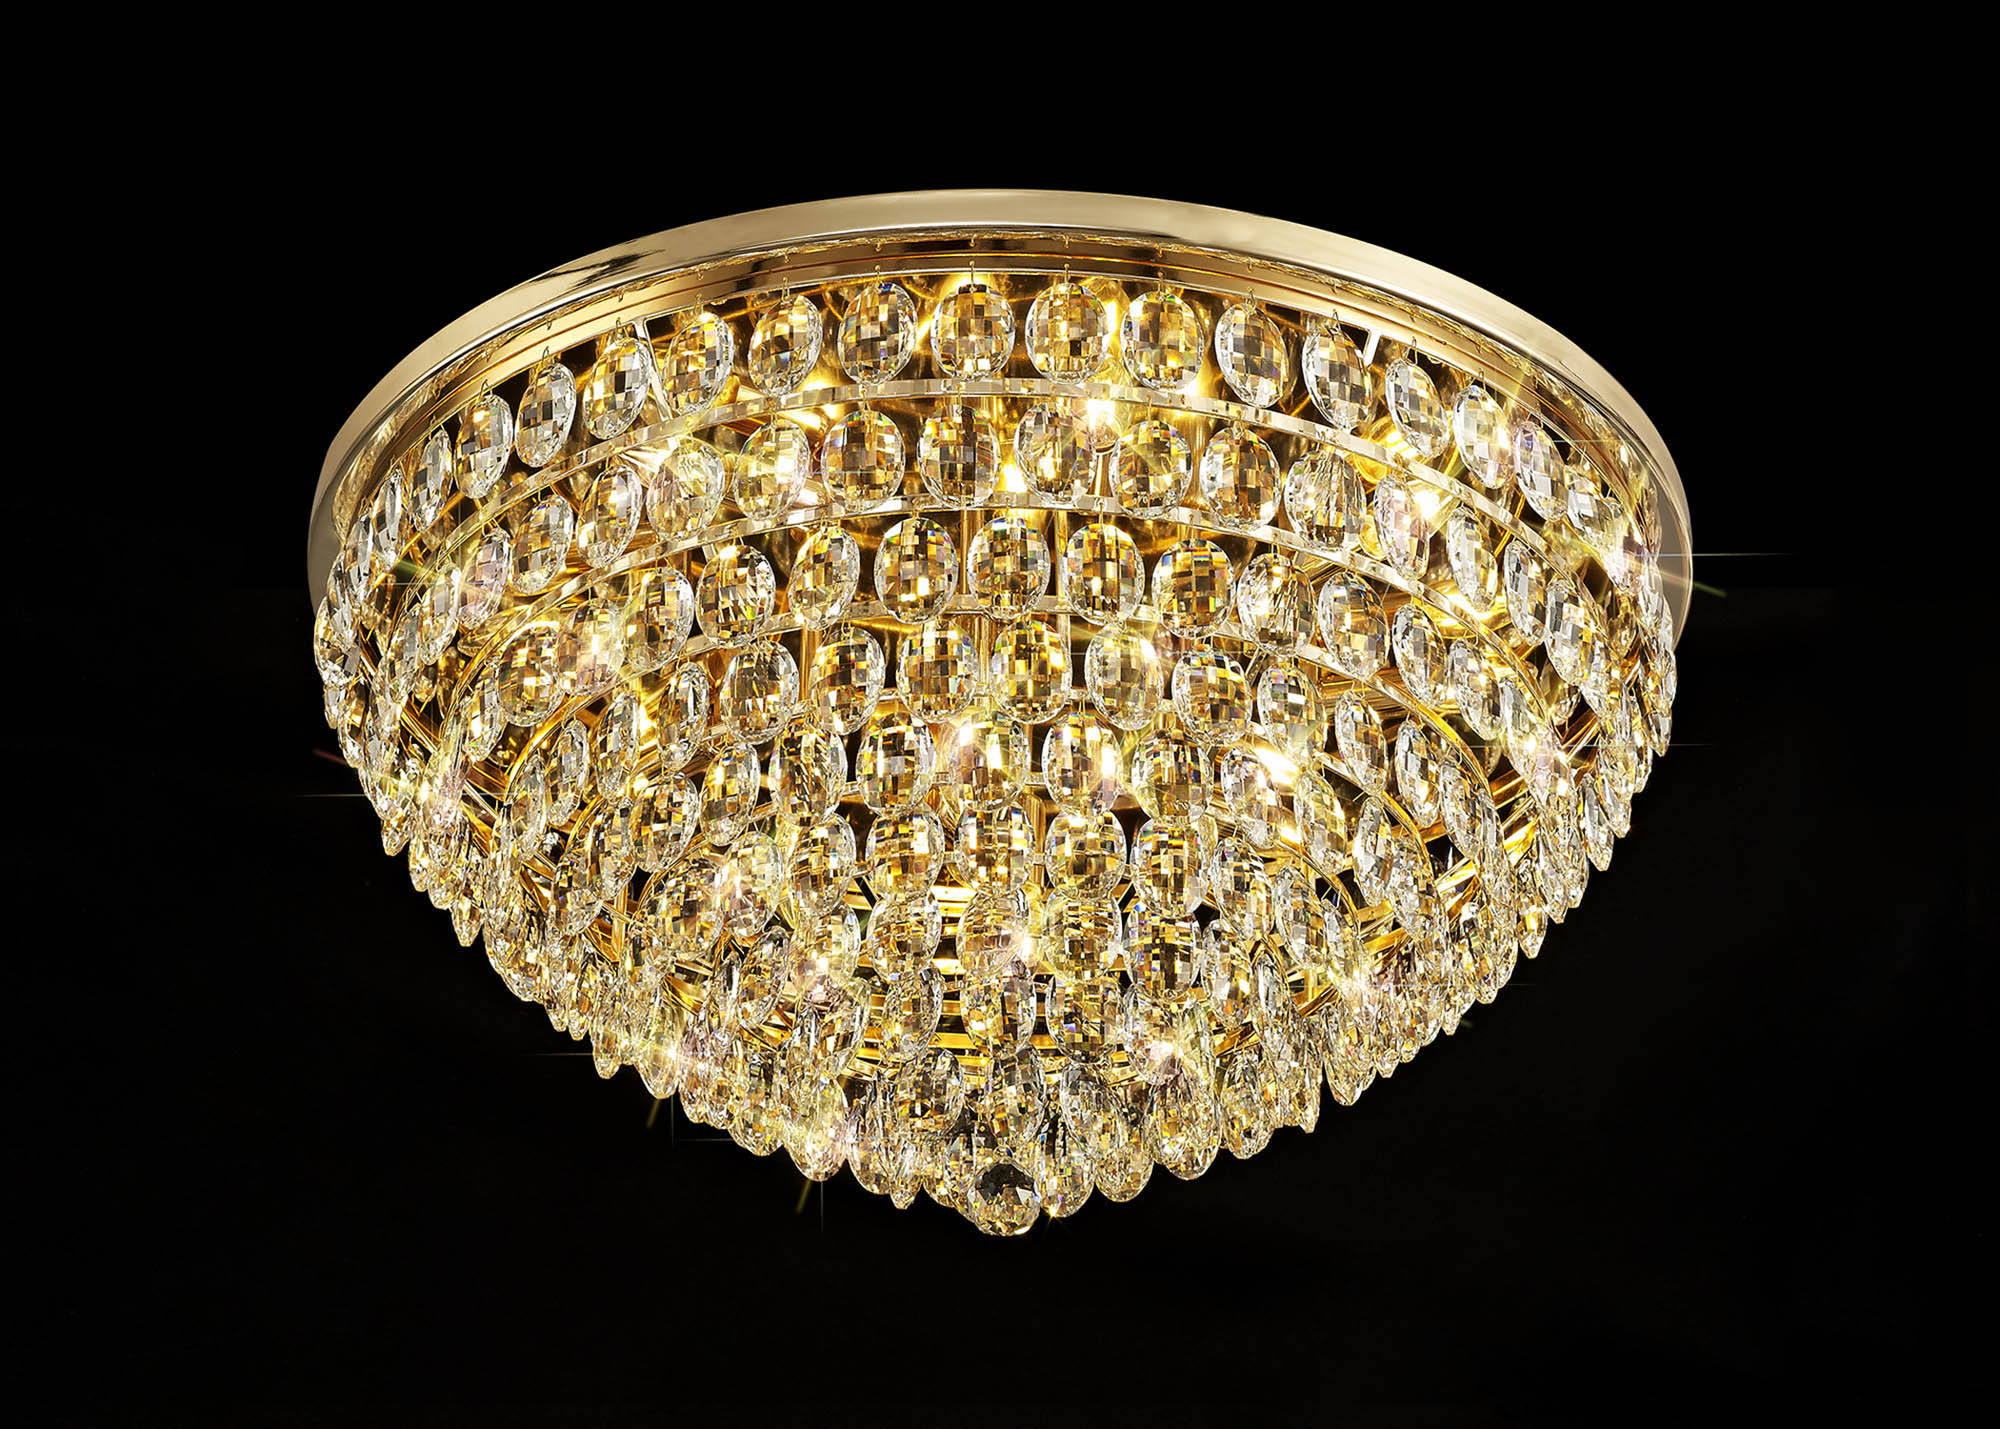 Coniston French Gold Crystal Ceiling Lights Diyas Flush Crystal Fittings